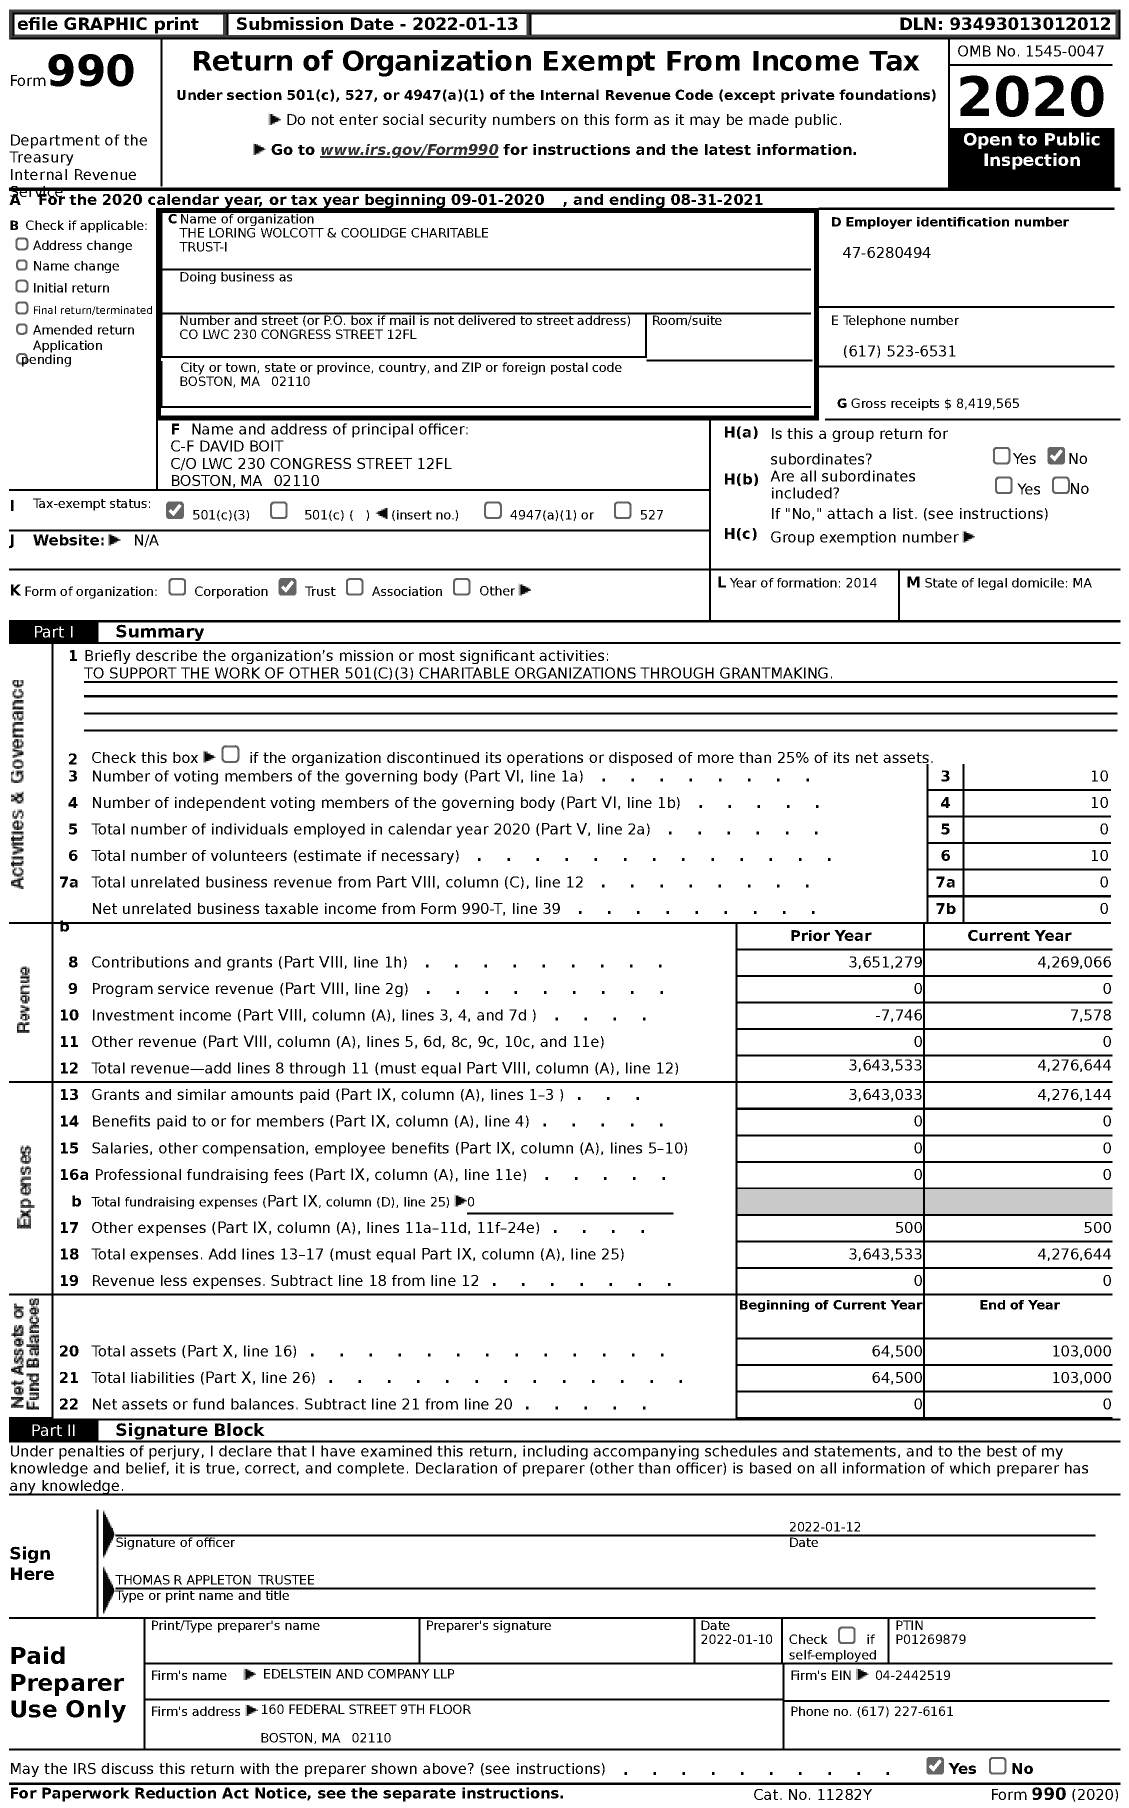 Image of first page of 2020 Form 990 for Loring, Wolcott & Coolidge